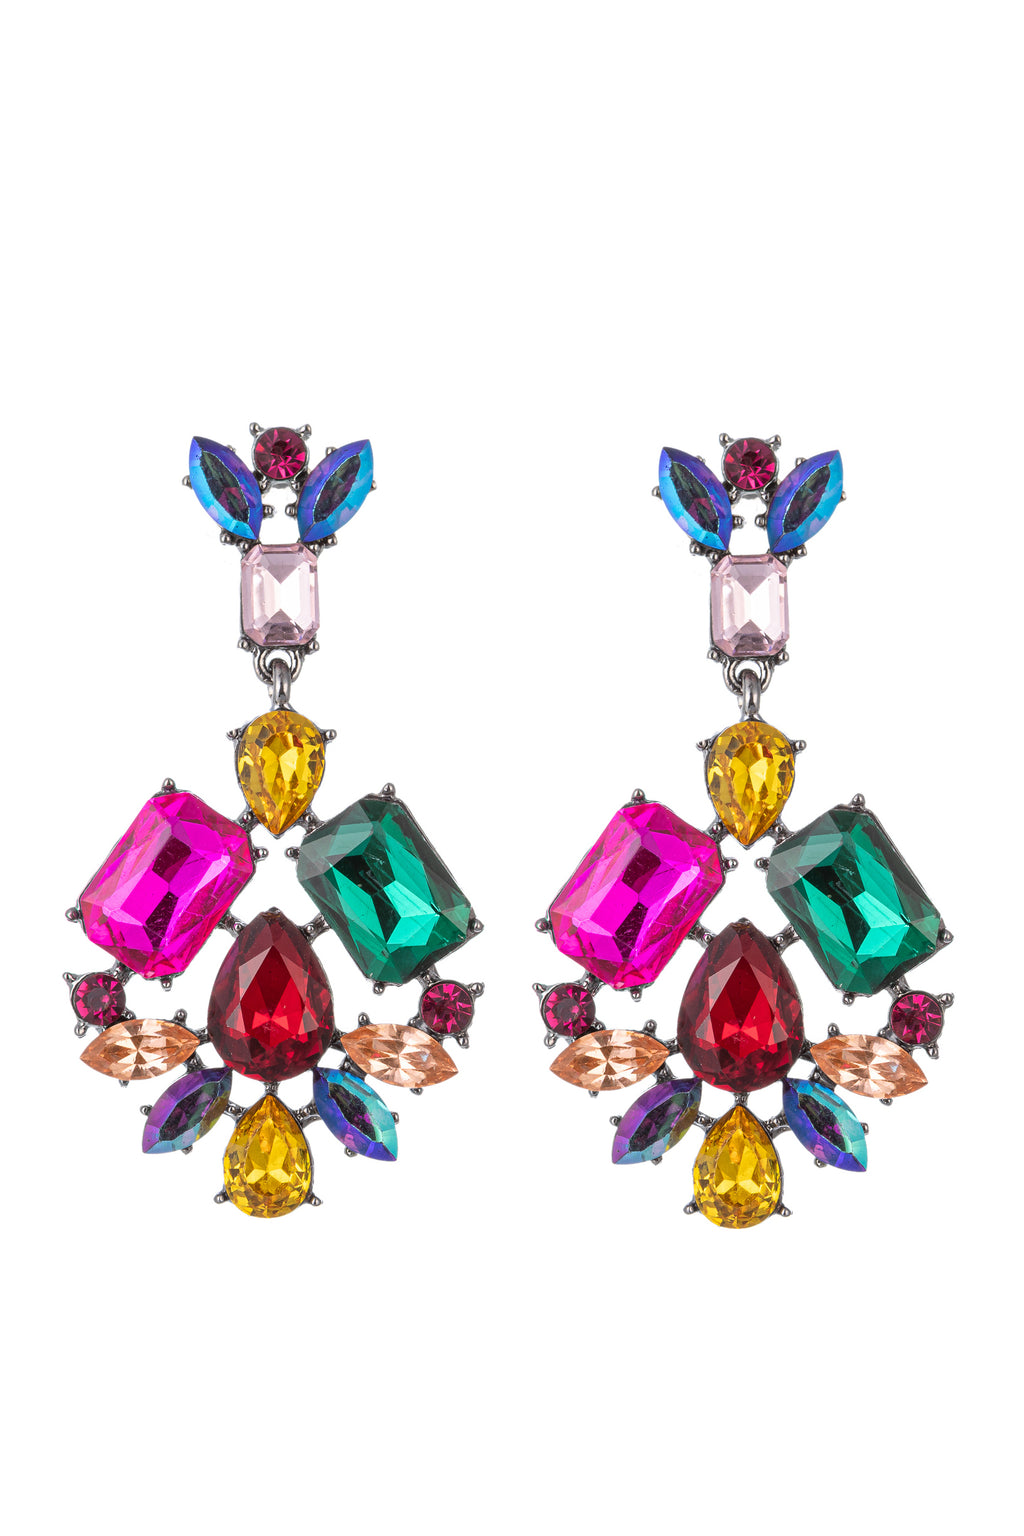 Silver alloy drop earrings studded with multicolor glass crystals.